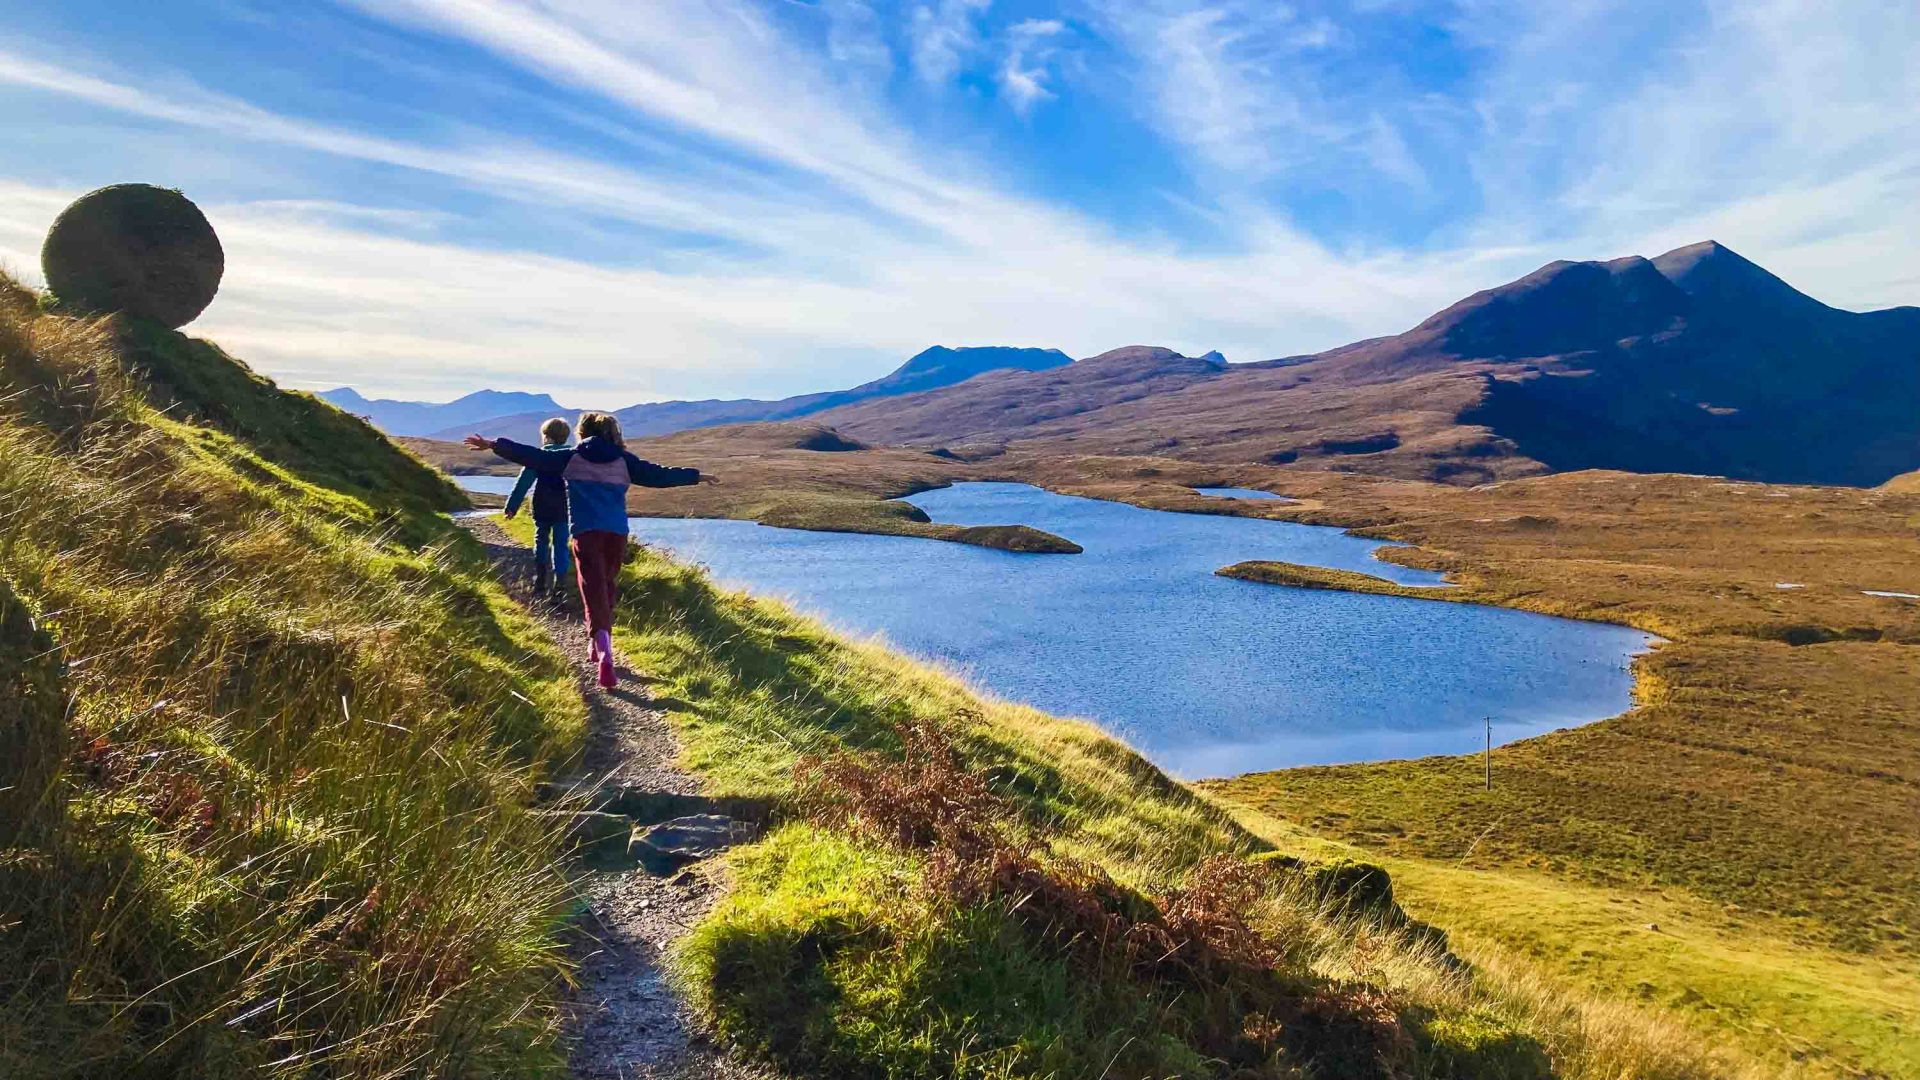 More than just a road: Rethinking Scotland’s NC500, the UK’s most famous road trip